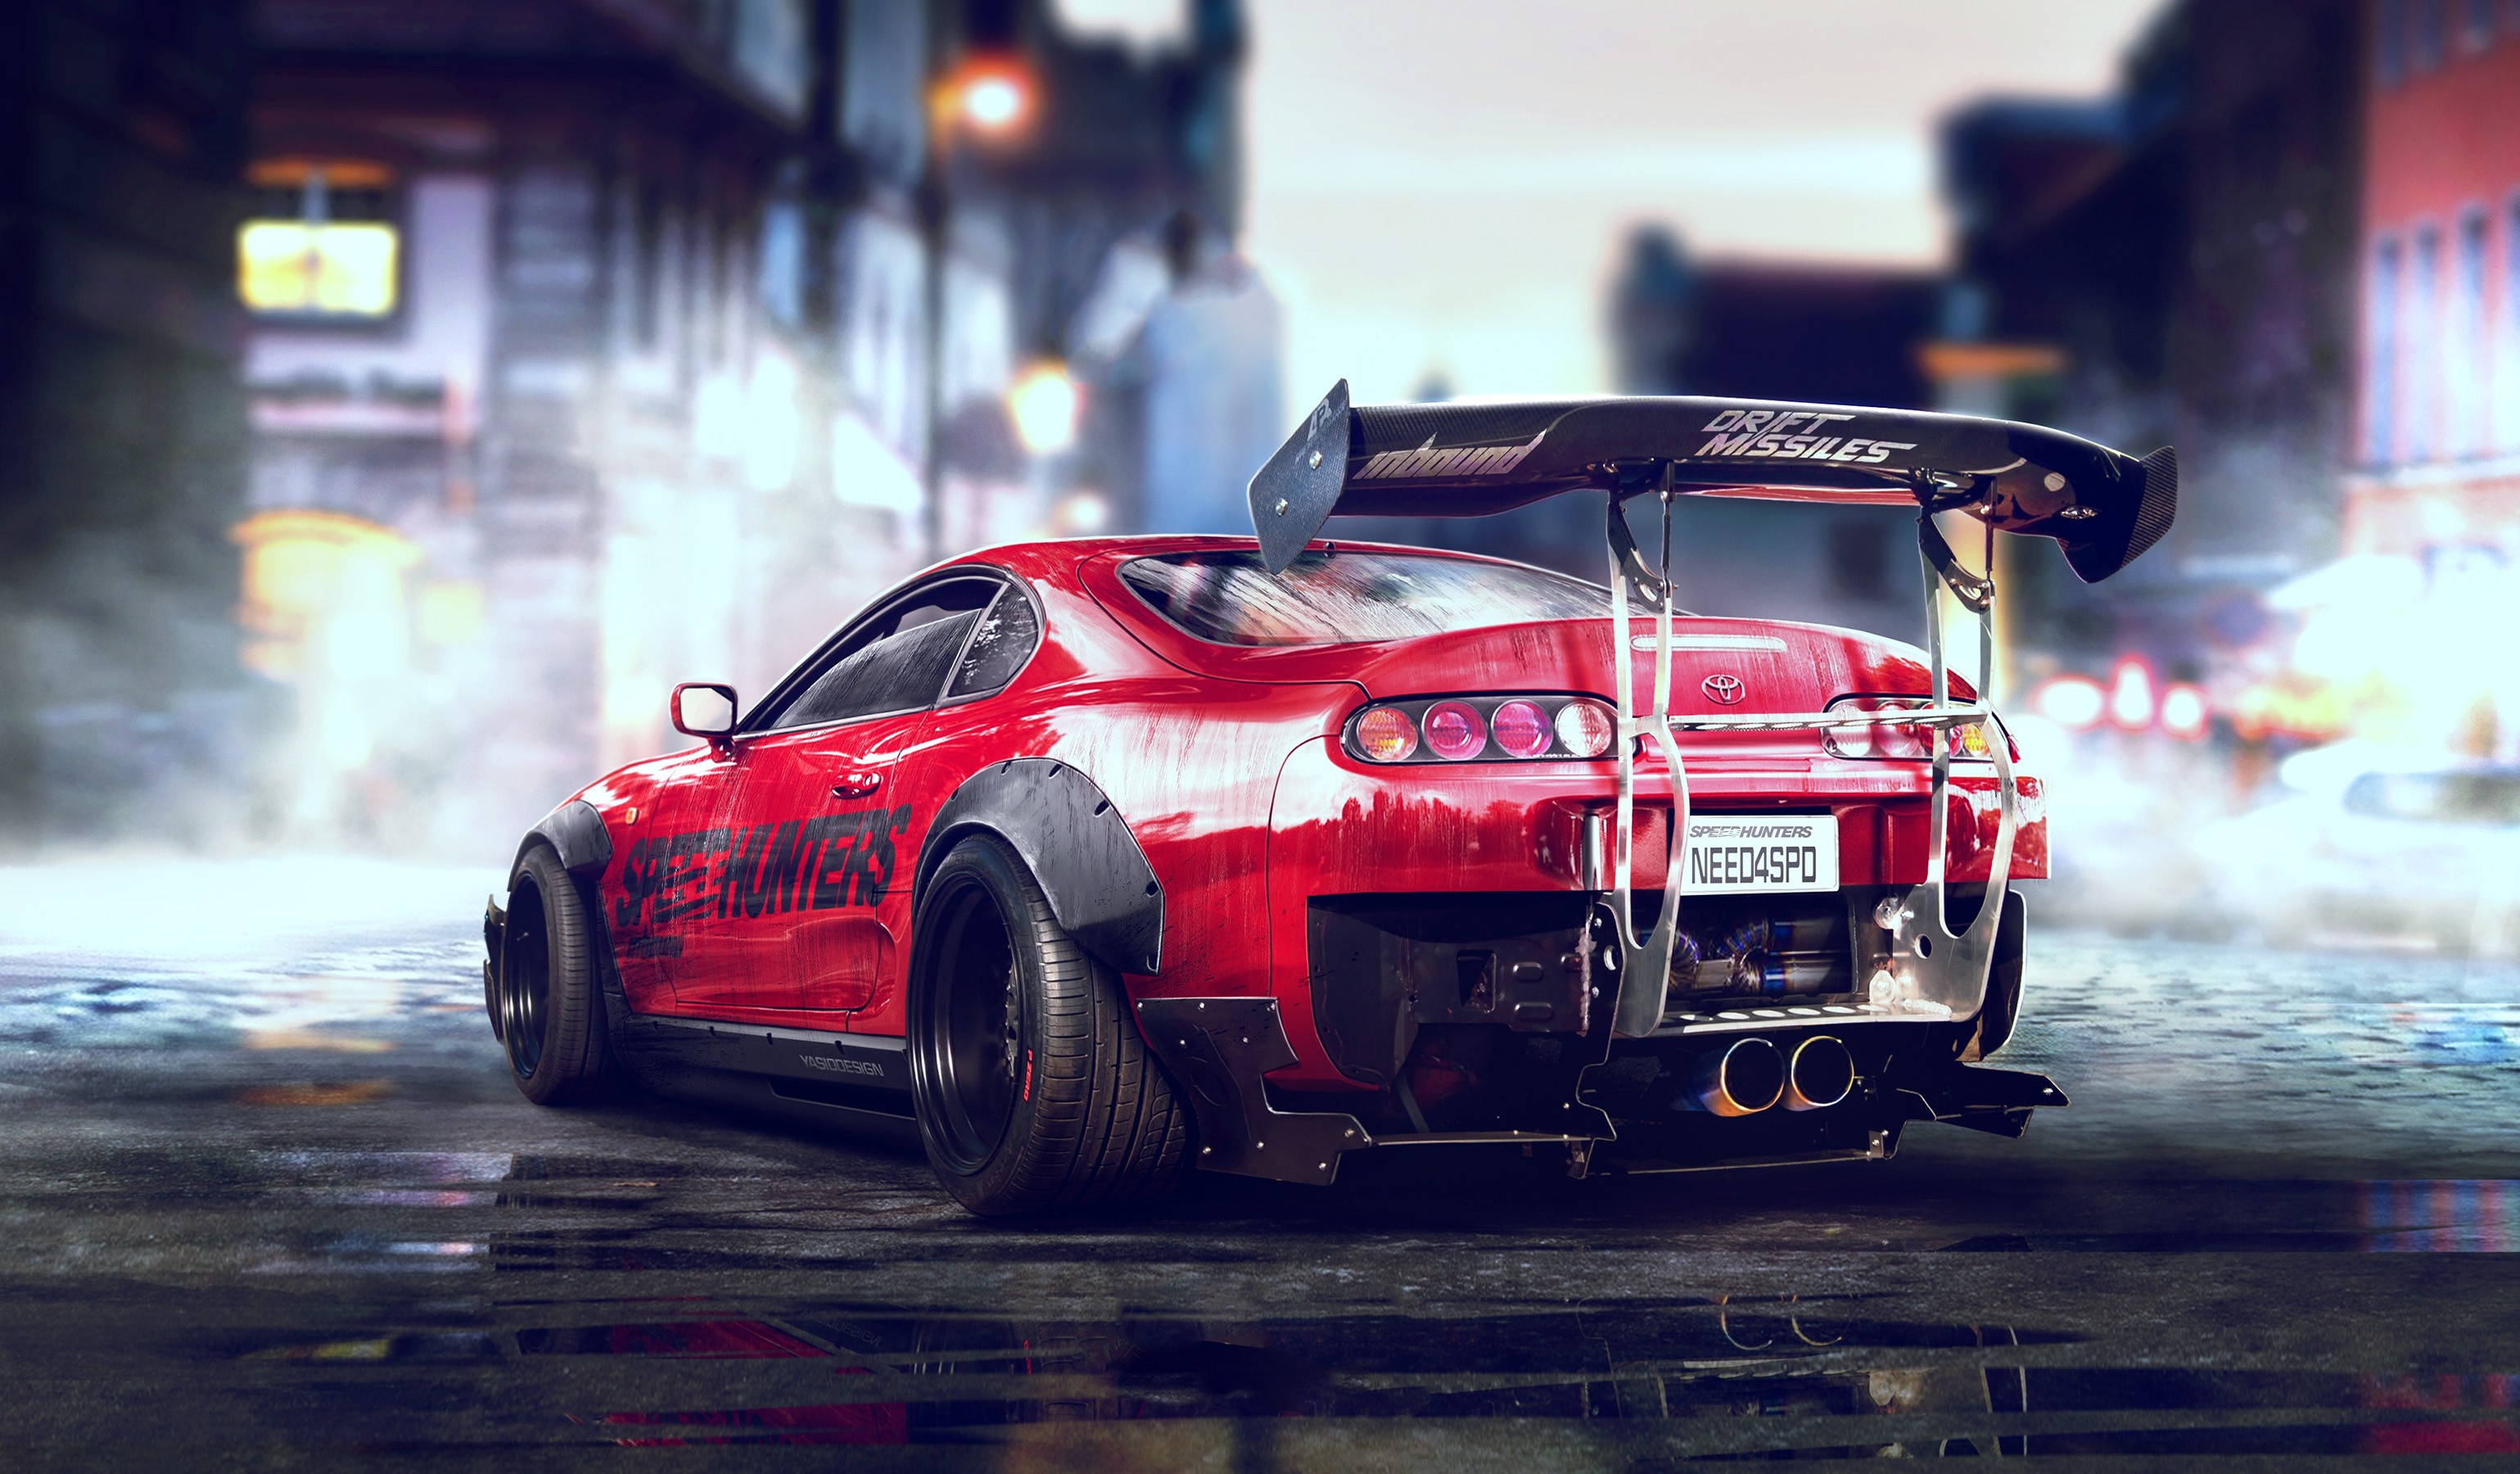 Toyota Supra Need For Speed Engine Exhaust Car Red Speedhunters 3078x1800